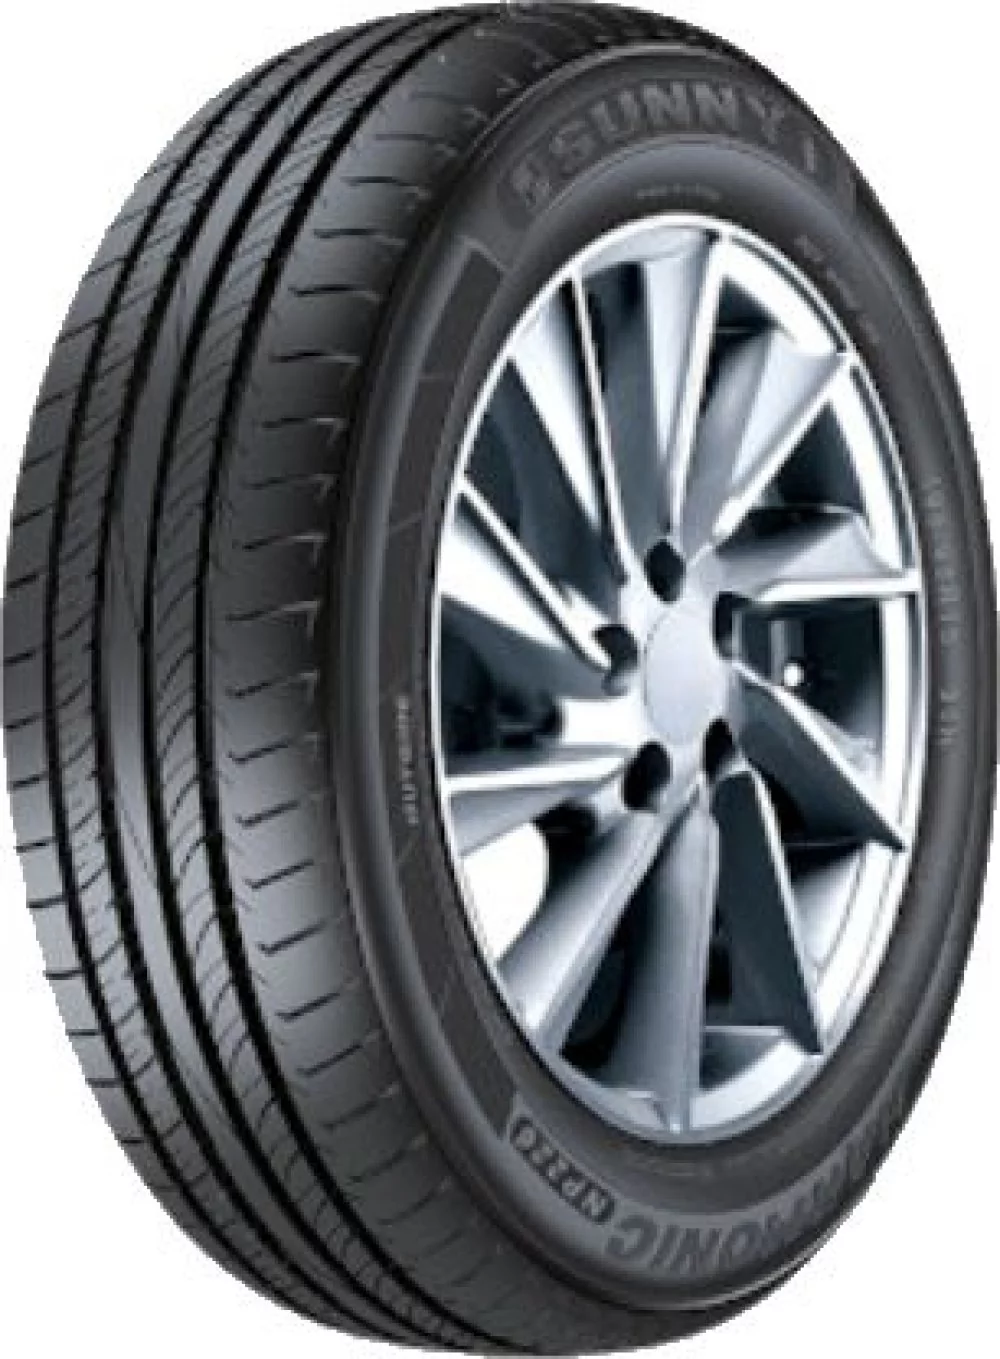 Sunny NP226 175/70R14 84T